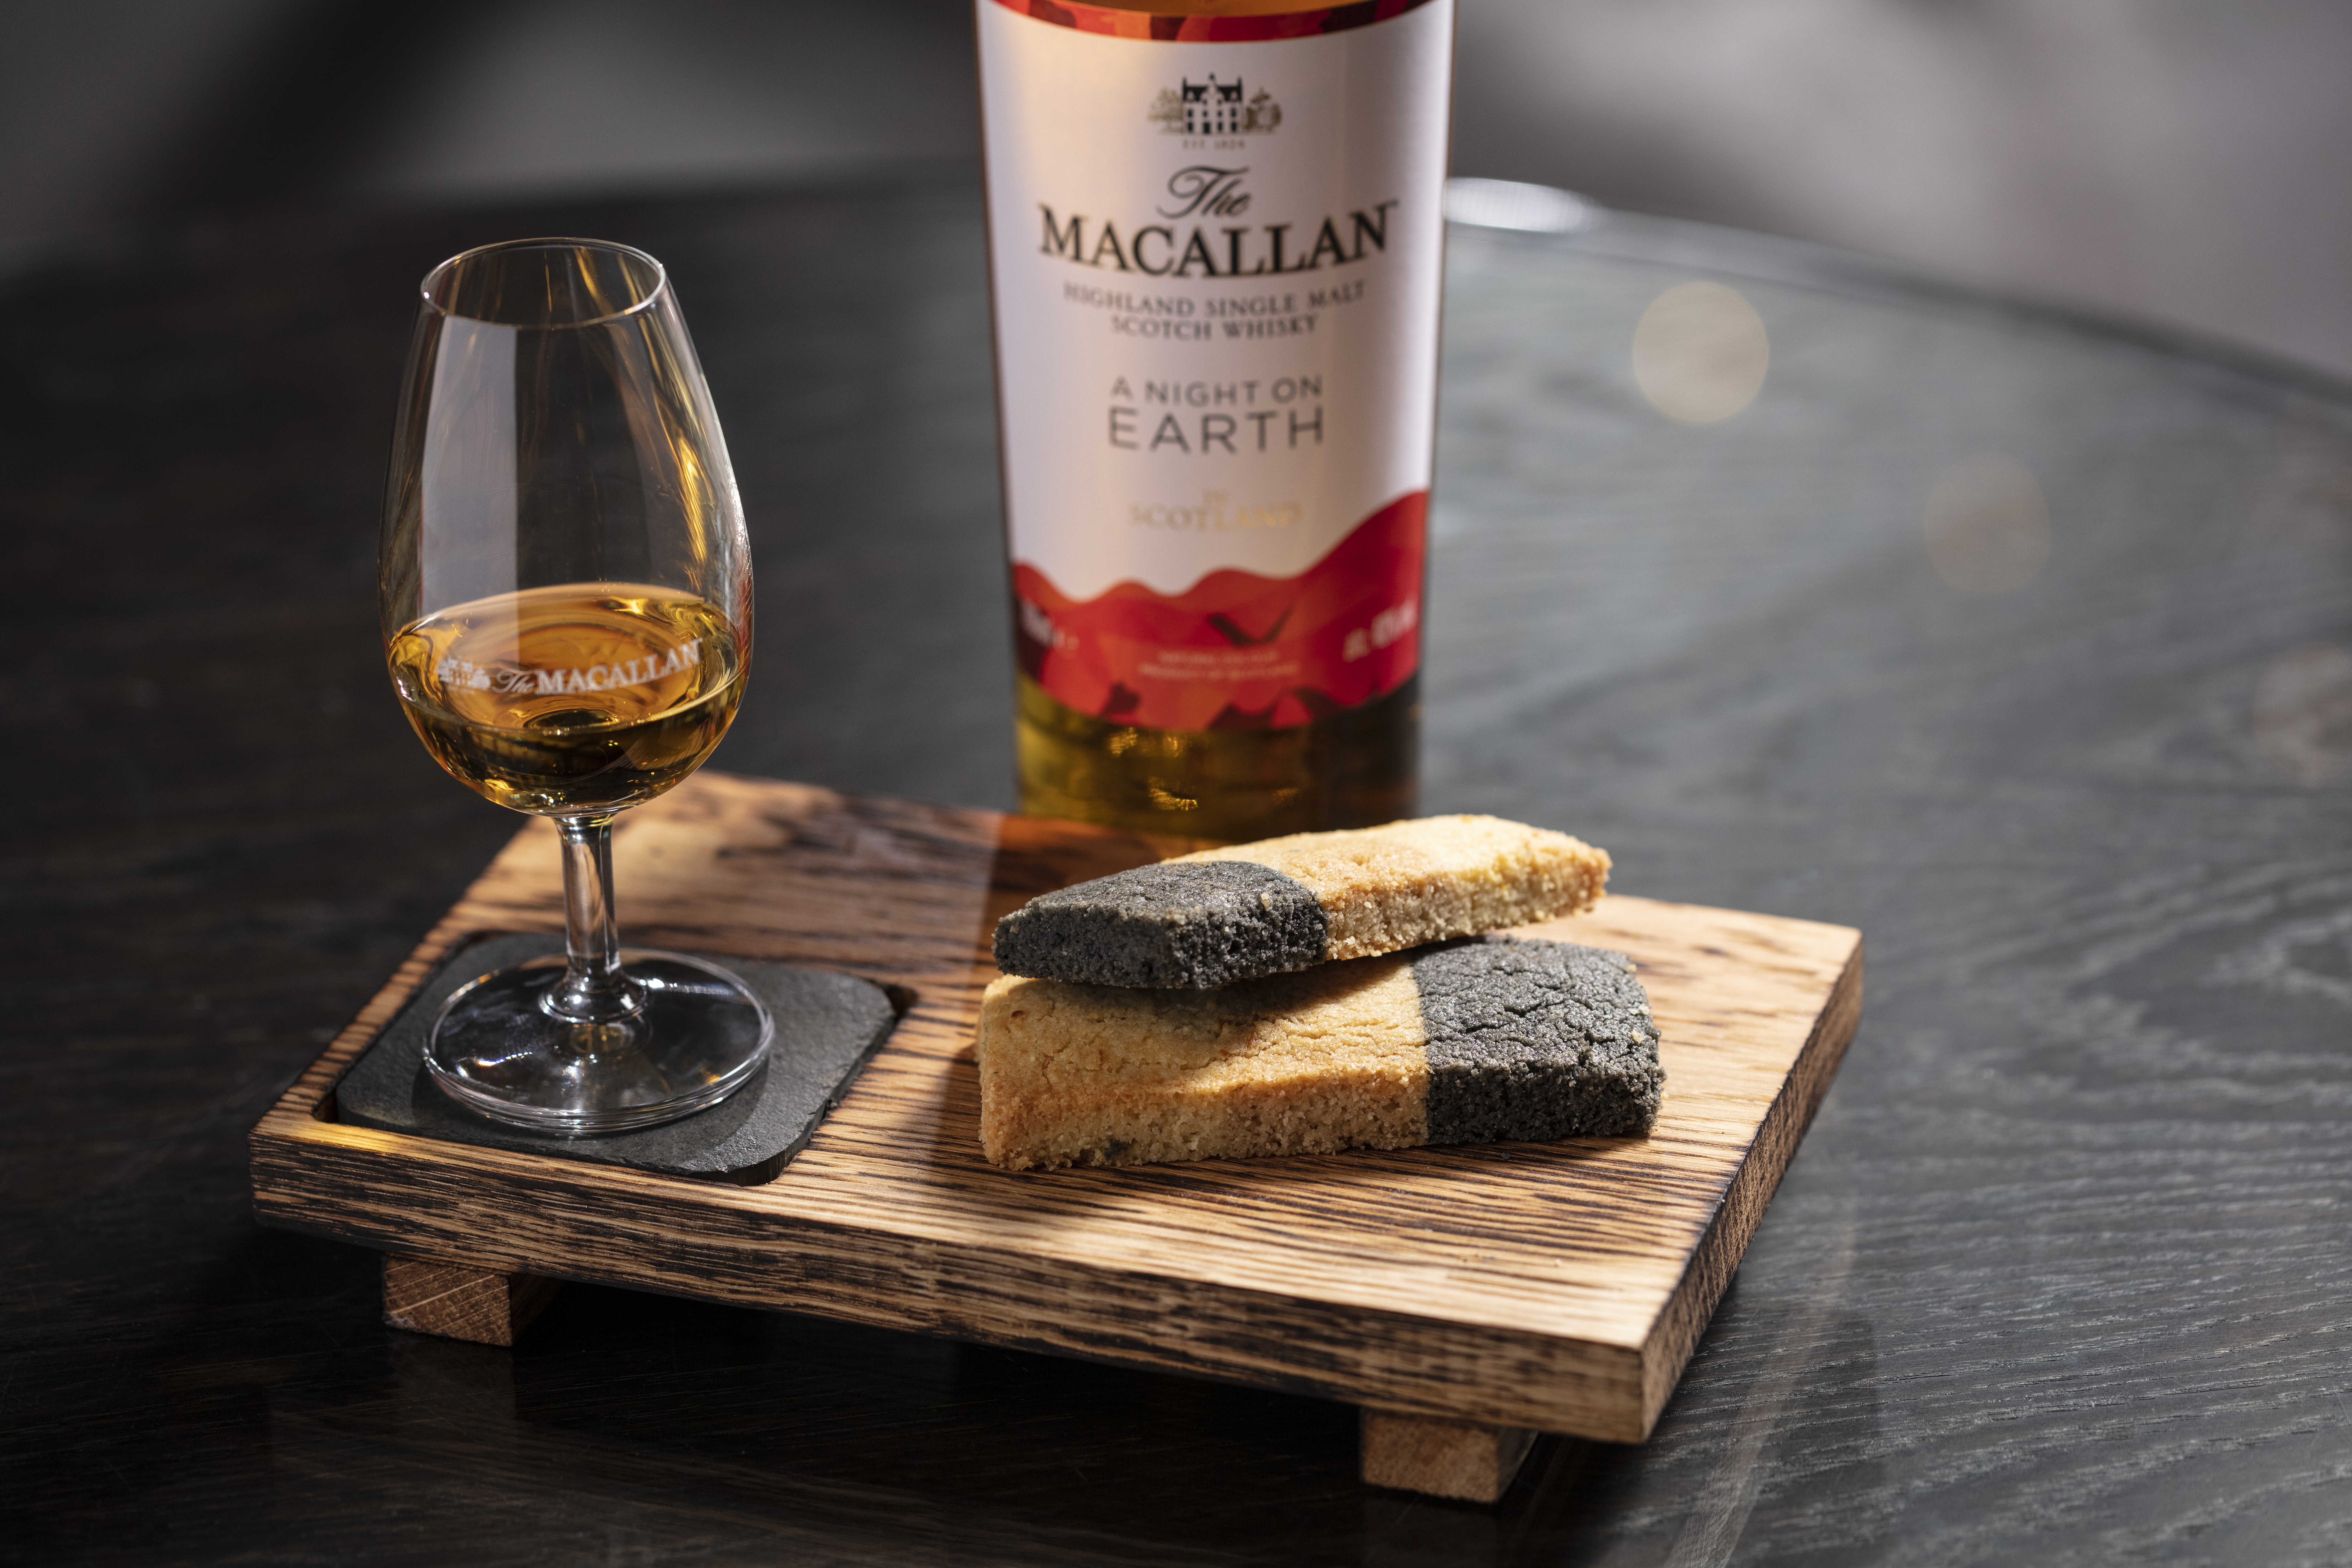 Macallan's bottle and glass